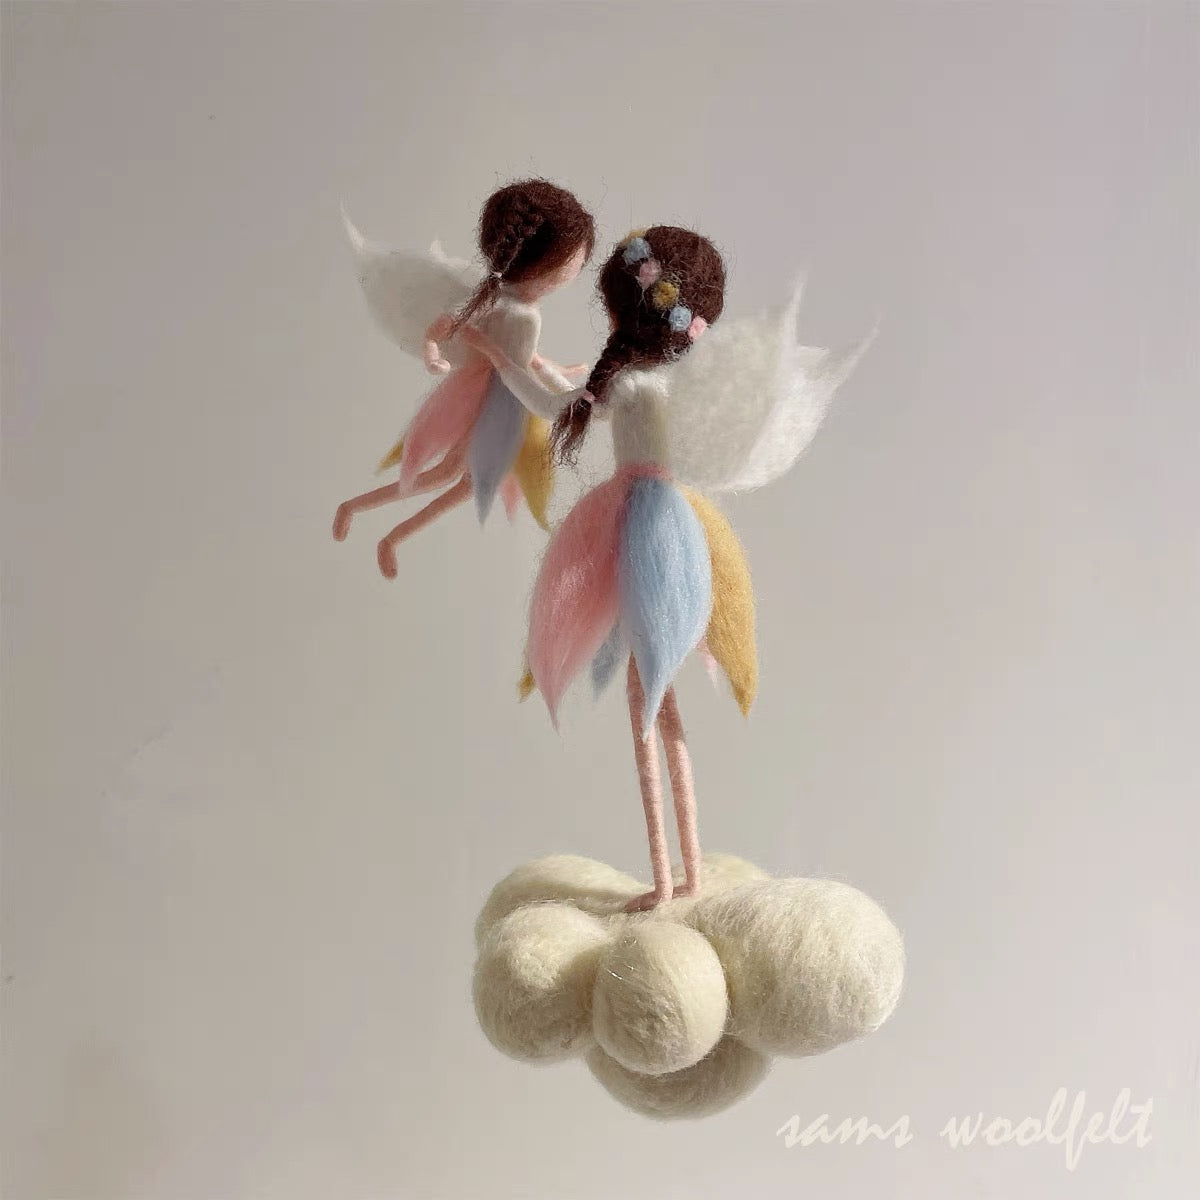 Guardian angel needle felted waldorf doll fairy doll, wool Material Kit Halloween Christmas Gift03